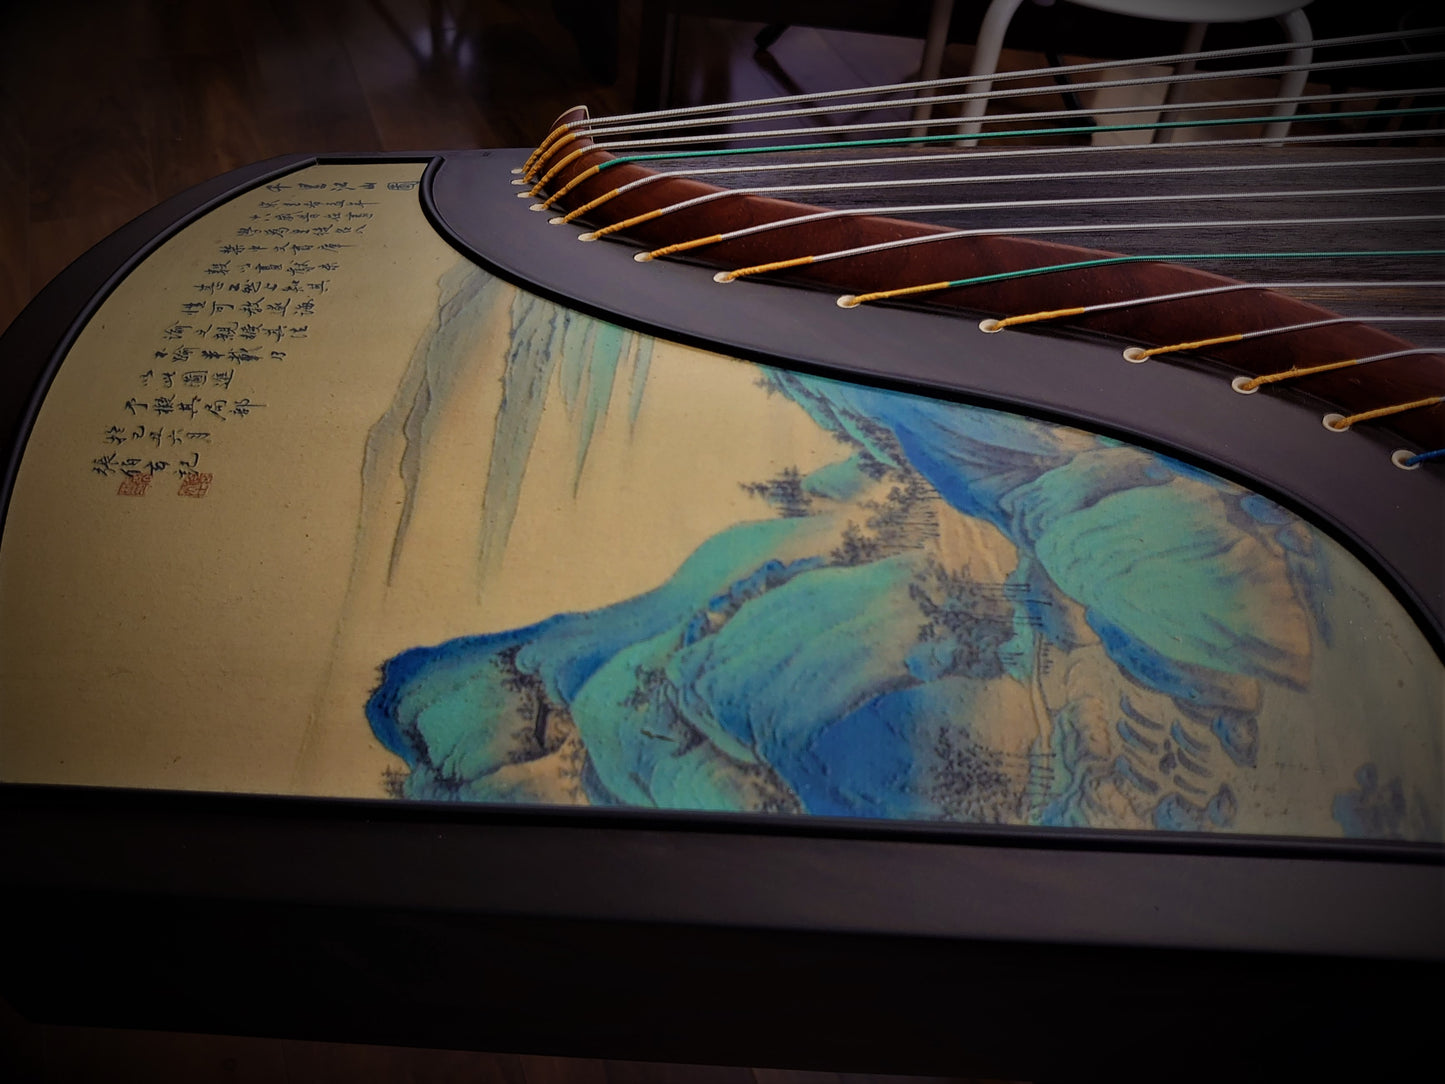 Songbo Madagascar Rosewood "A Thousand Li of Rivers and Mountains" Guzheng